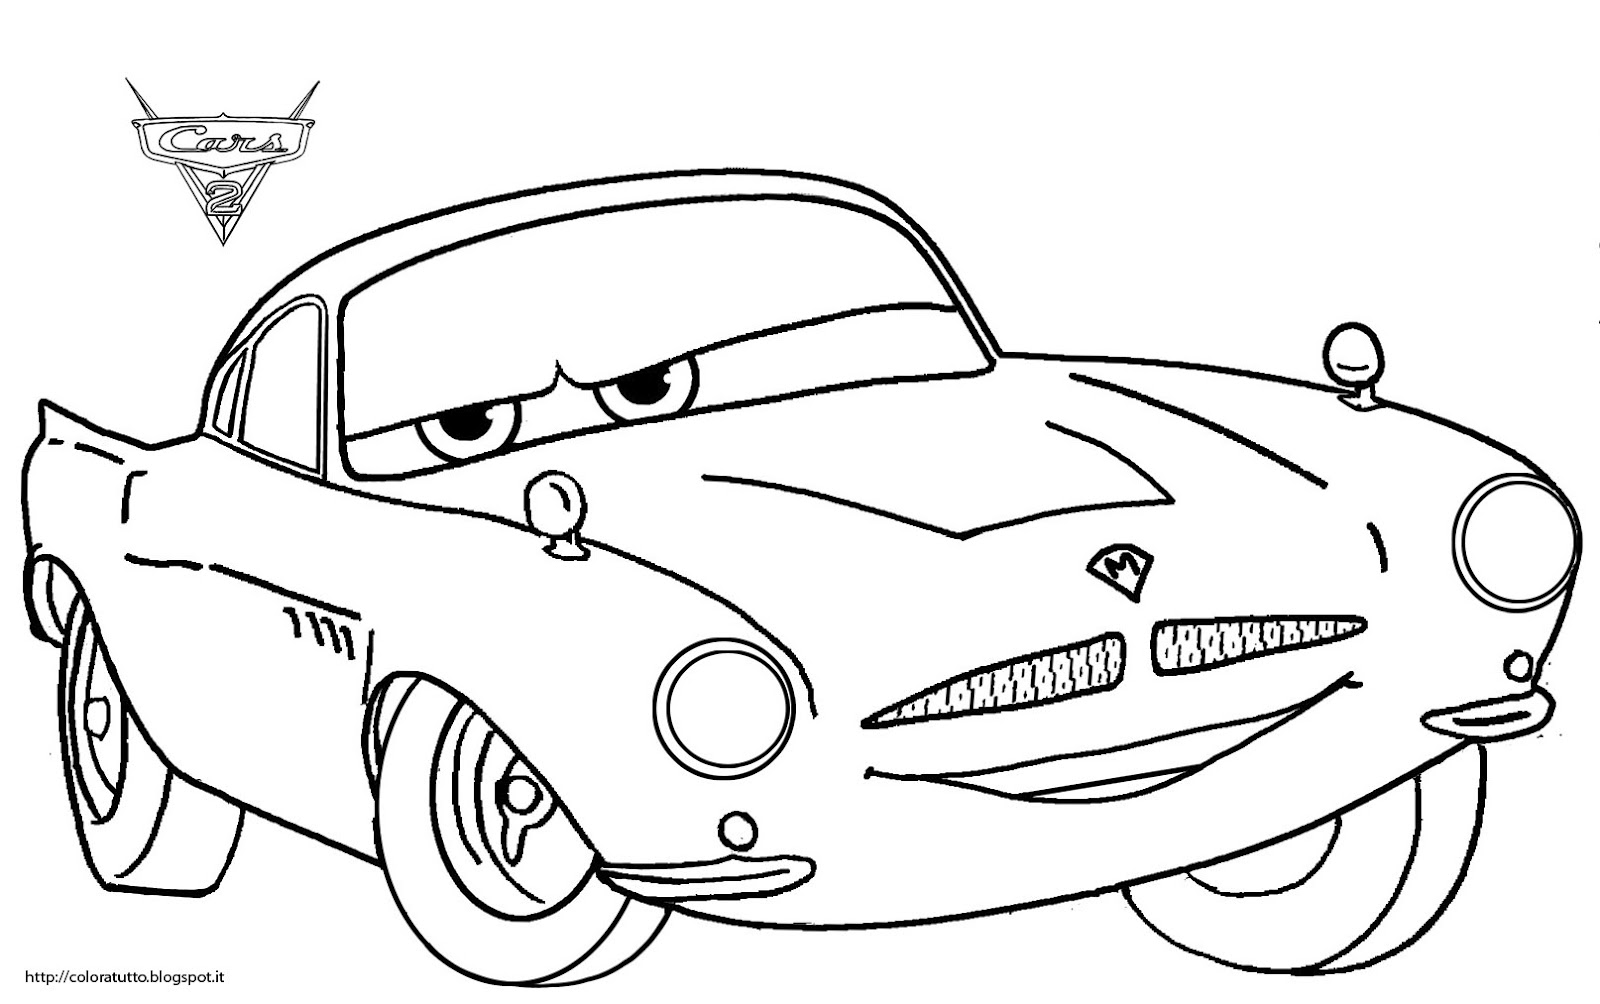 cars 2 pictures to print cars 2 printable coloring pages grem cars 2 colouring cars to print pictures 2 